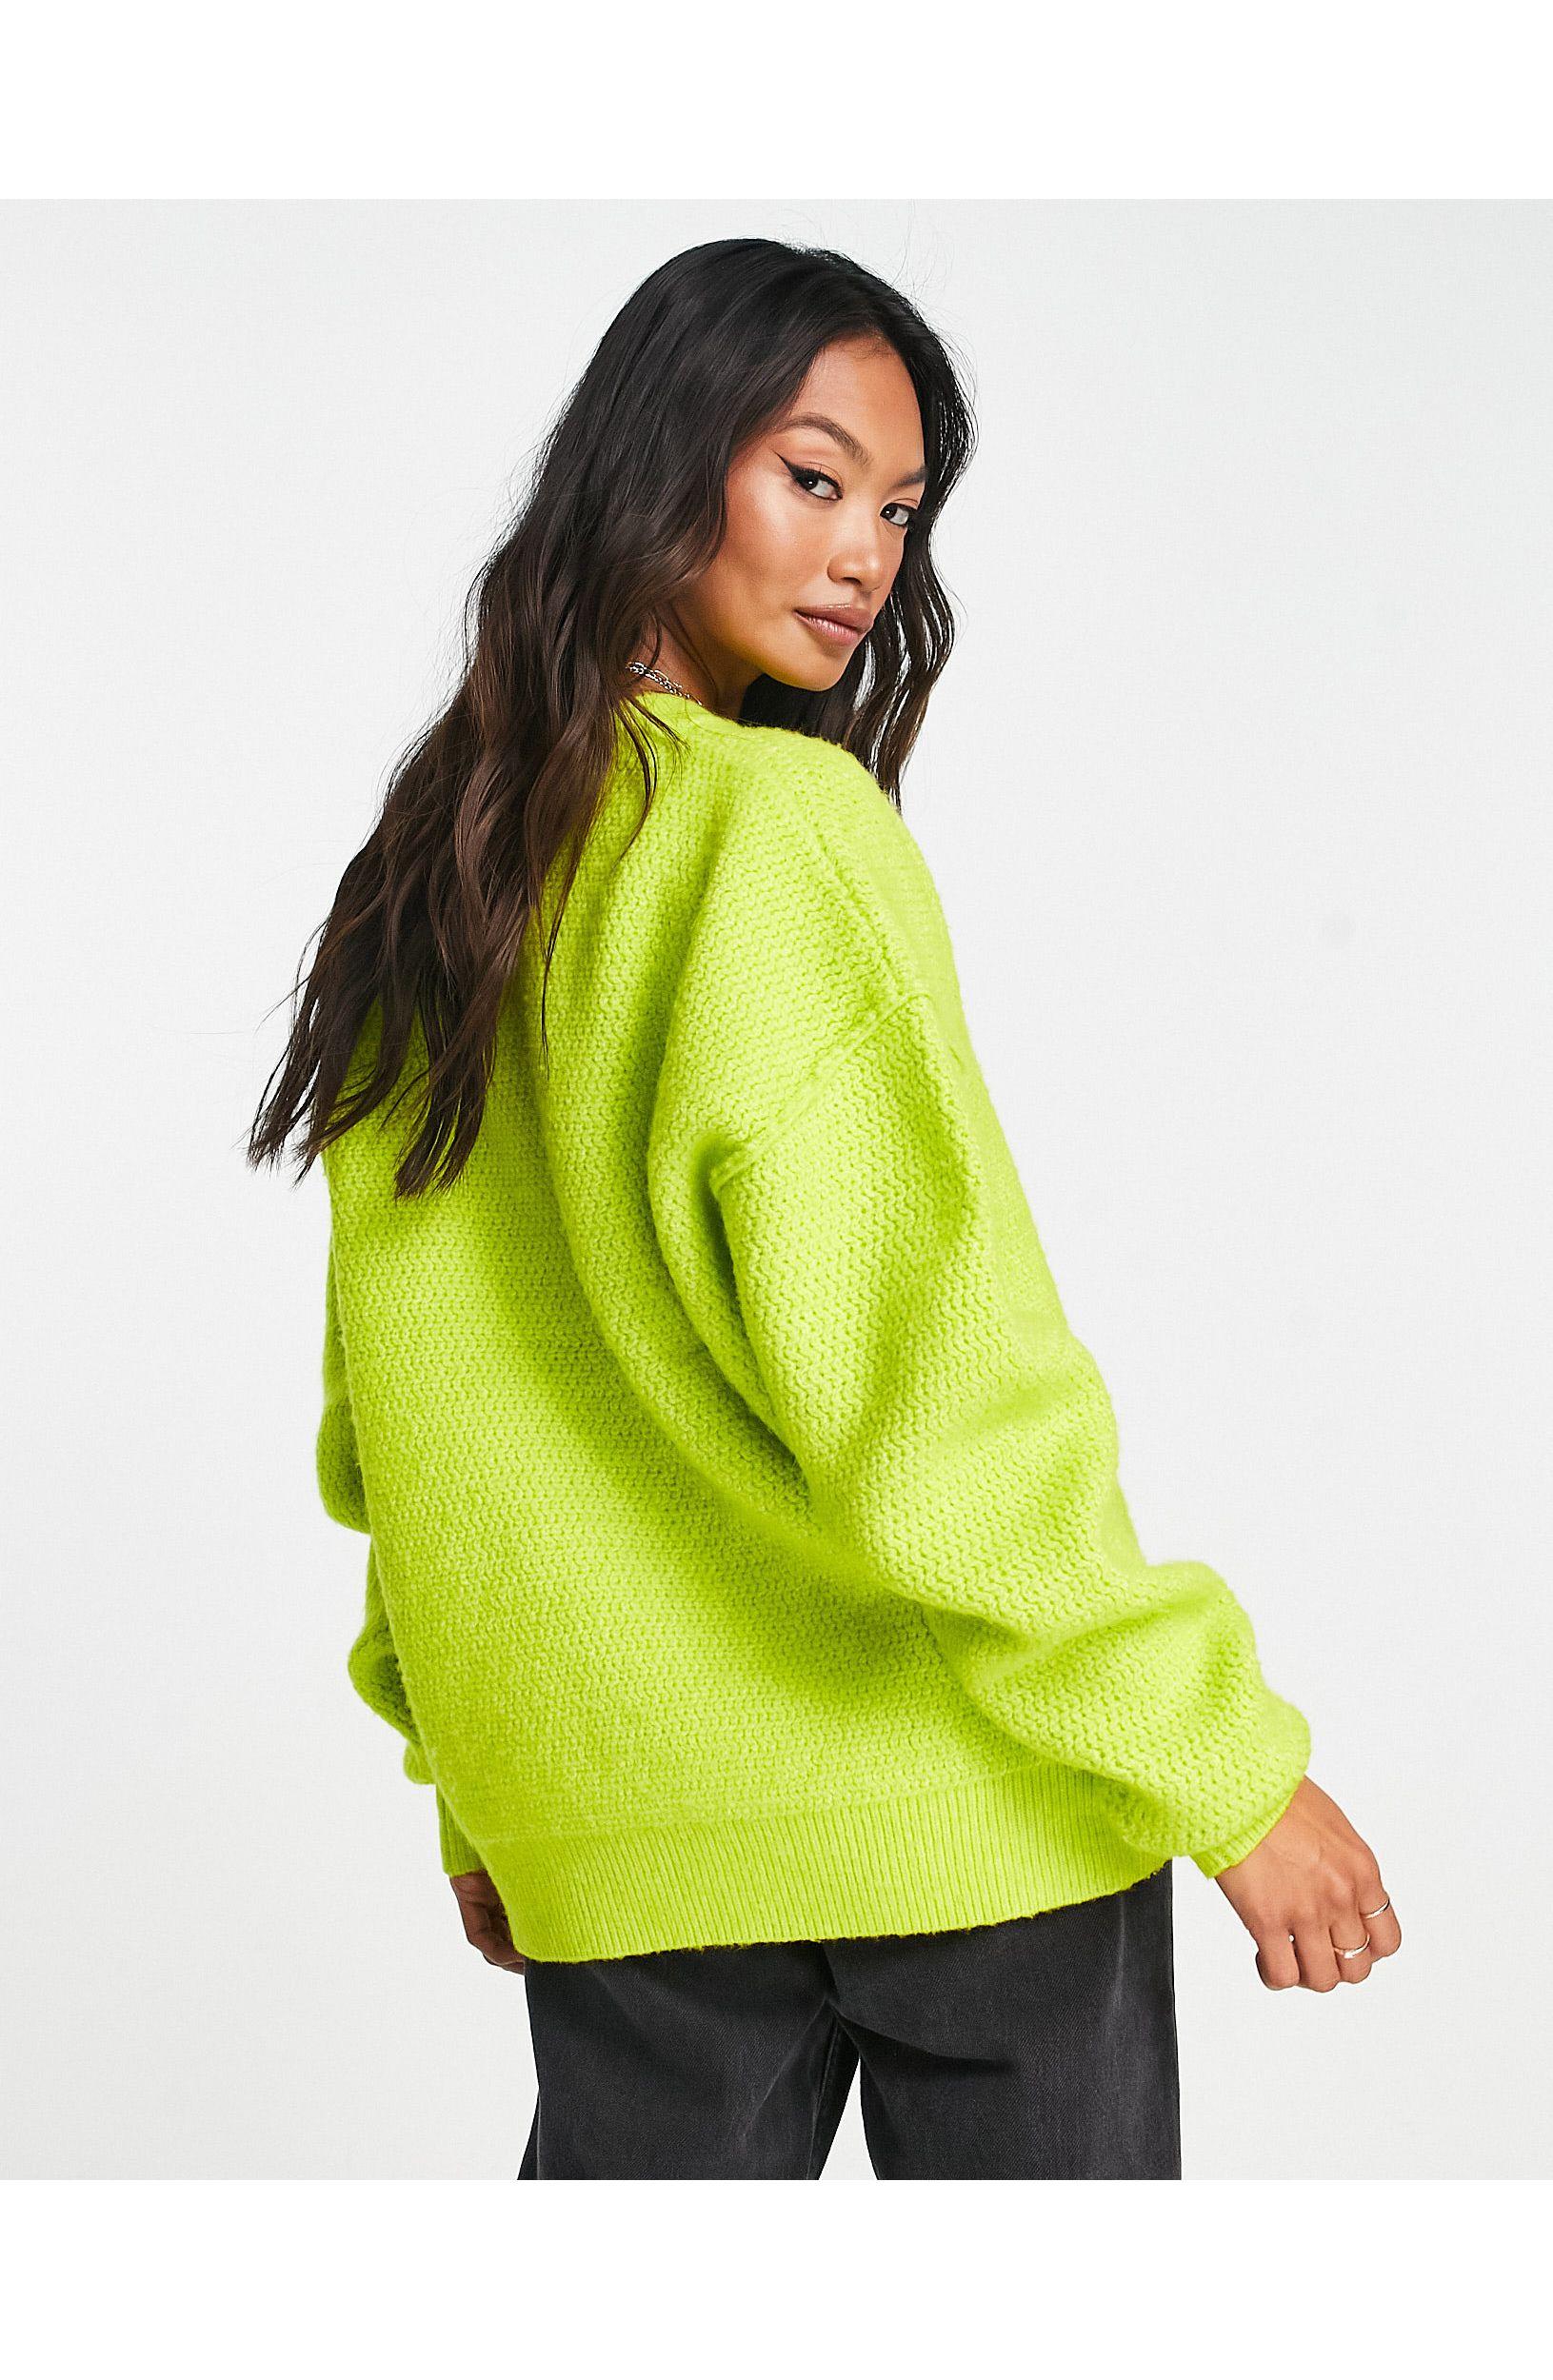 TOPSHOP Knitted Exposed Seam Jumper in Yellow | Lyst